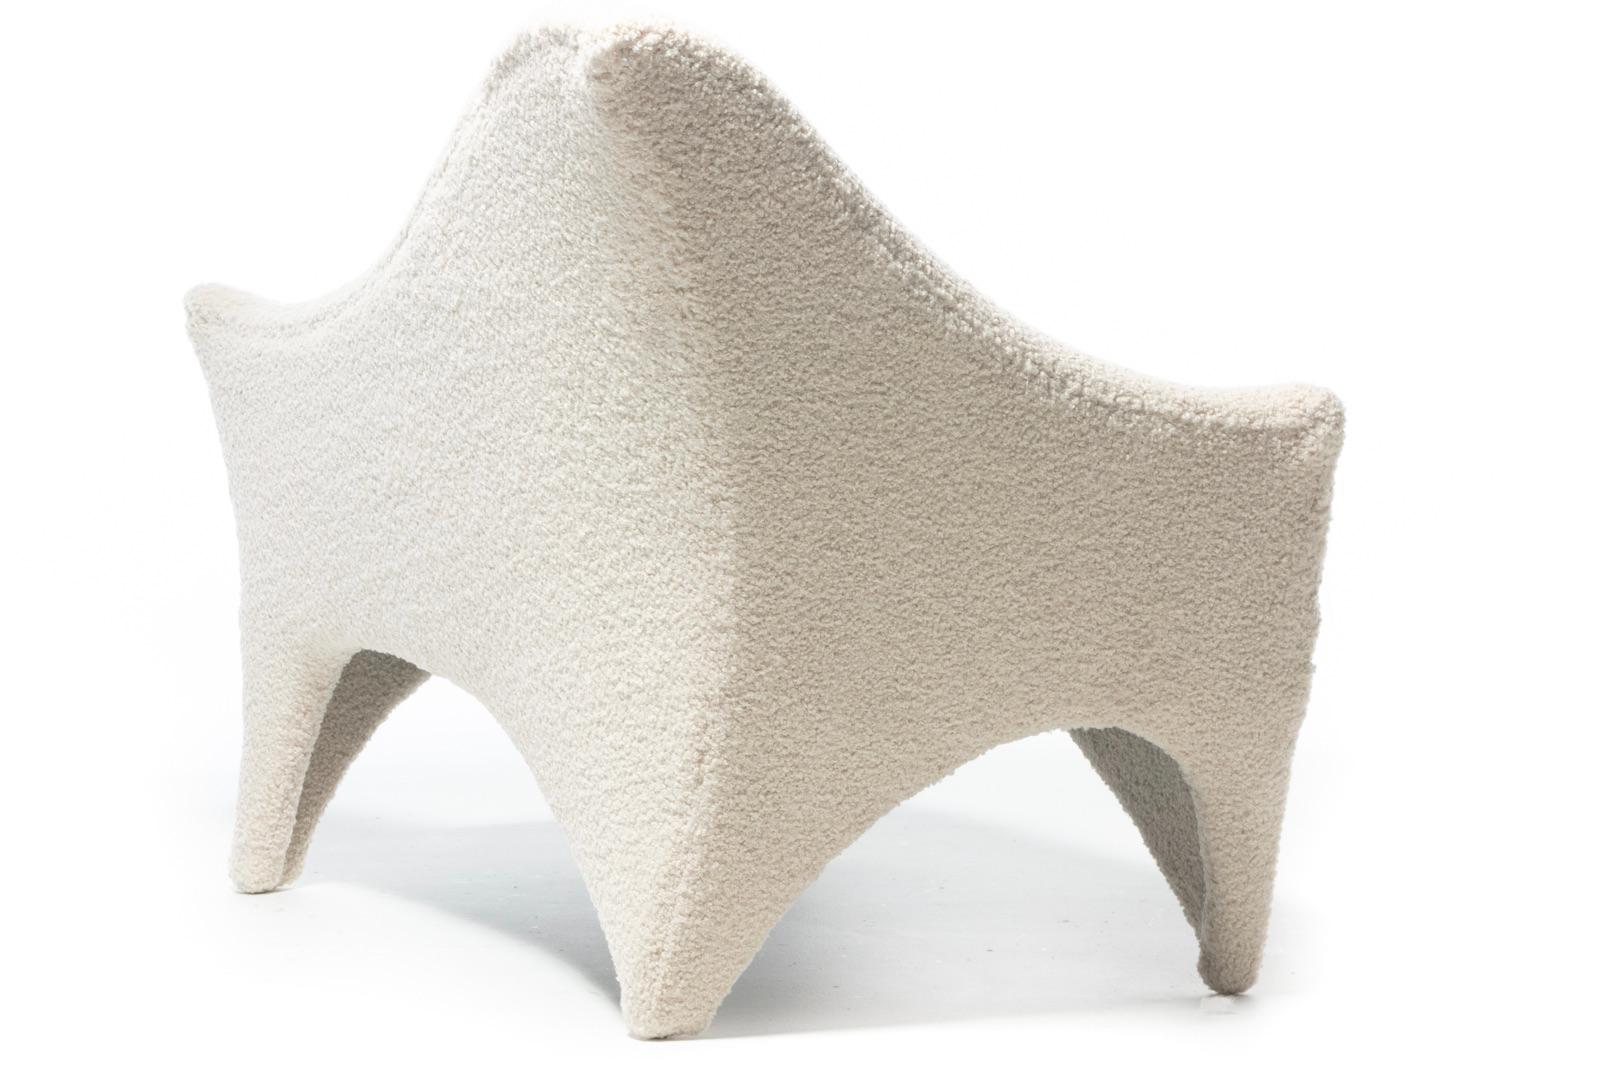 Vladimir Kagan A-Symmetric Settee in Ivory Bouclé by Directional, c. 1991 For Sale 5